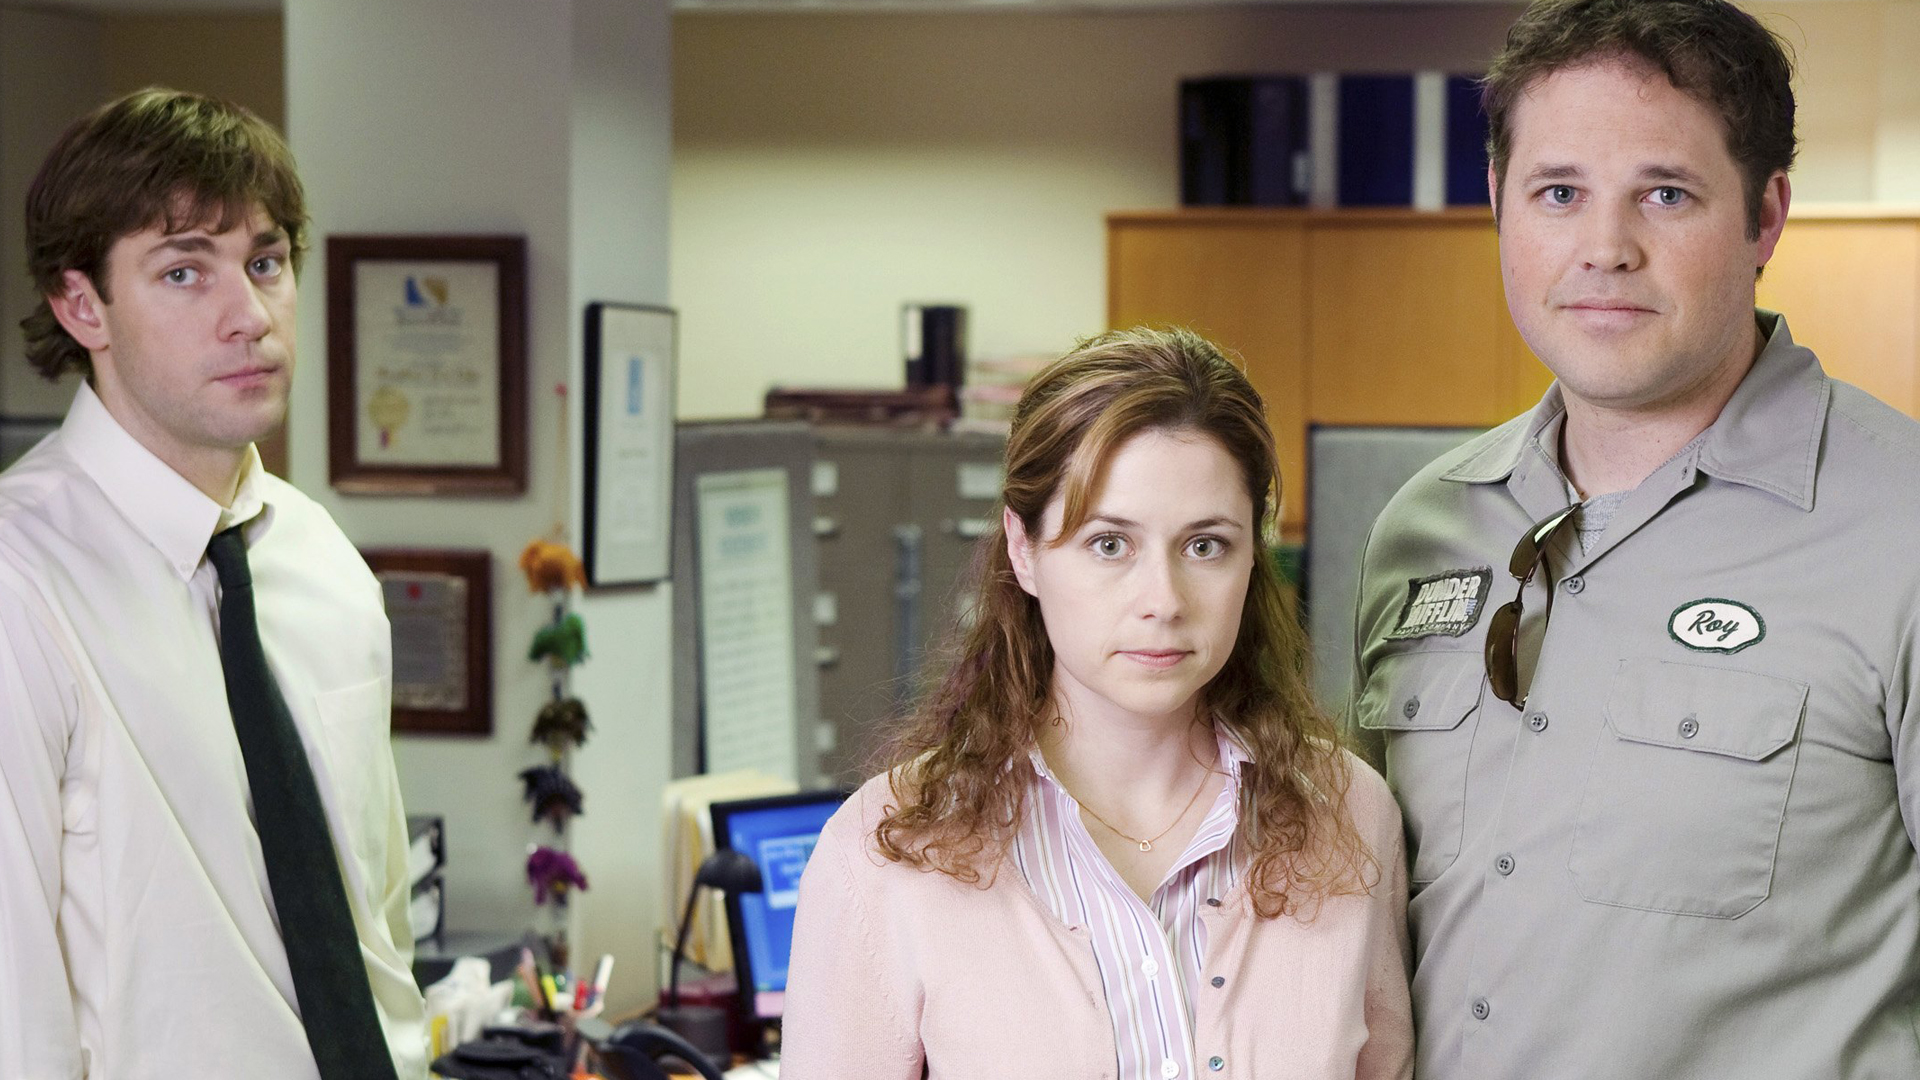 The Office Jenna Fischer S Pam And Roy Theory Is Wild But We